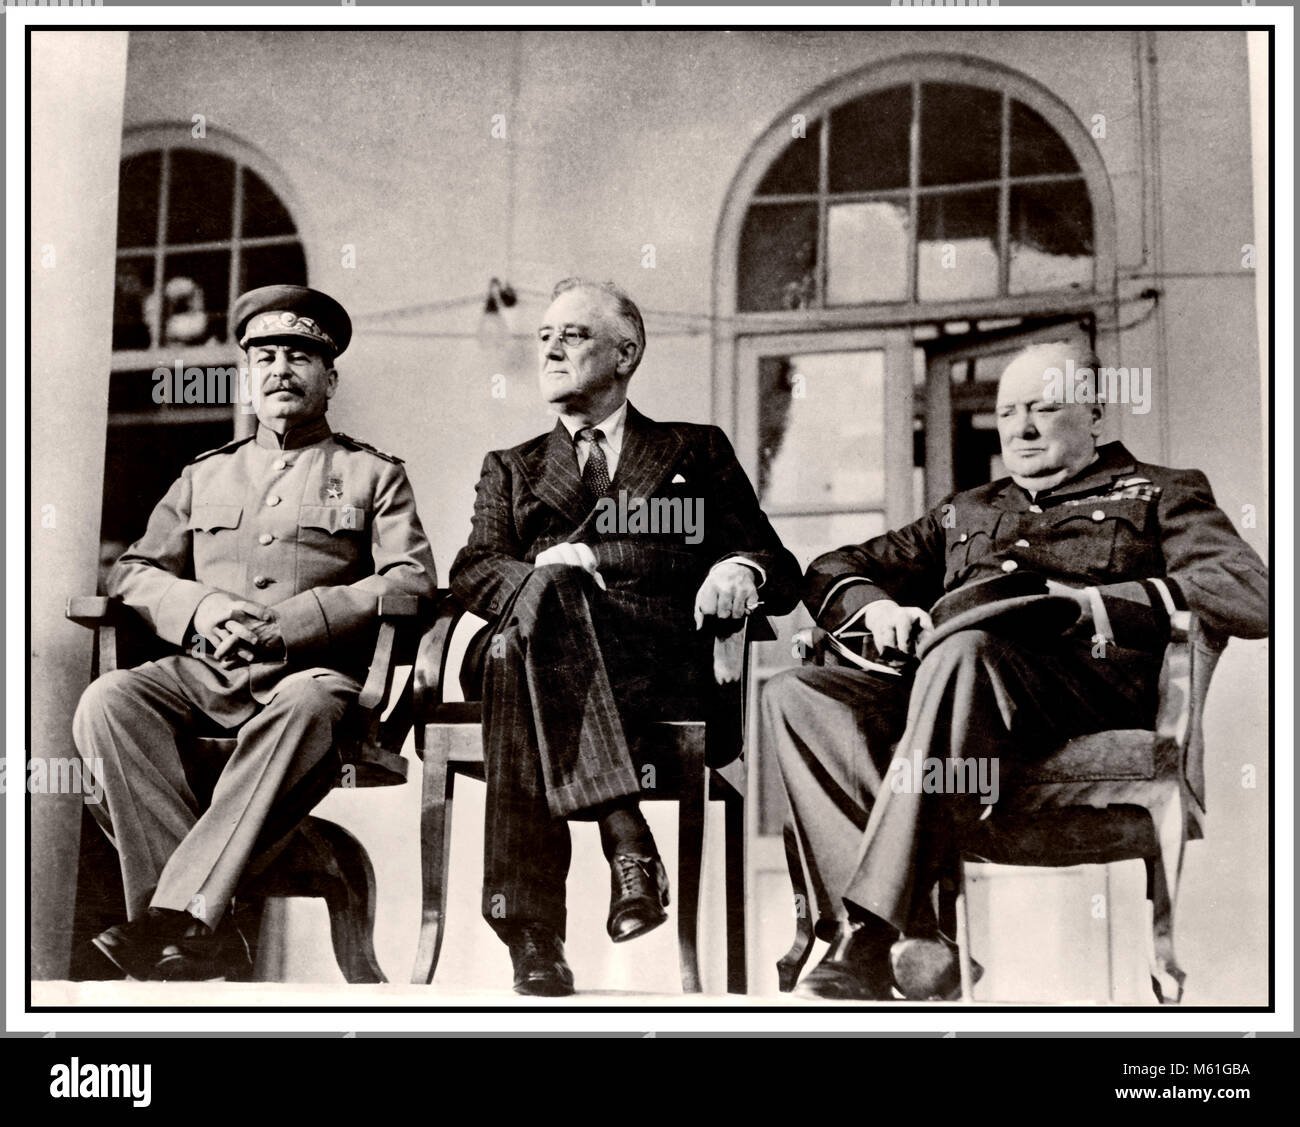 Historic WW2 Tehran Conference (codenamed Eureka) a strategic meeting of leaders Joseph Stalin, Franklin D. Roosevelt, and Winston Churchill 28th November /1 December 1943. It was in the Soviet Union's embassy in Tehran Iran. It was the first of the WW2 meetings of the Allied leaders from Soviet Union, United States, and United Kingdom They discussed opening a second front against Nazi Germany Stock Photo